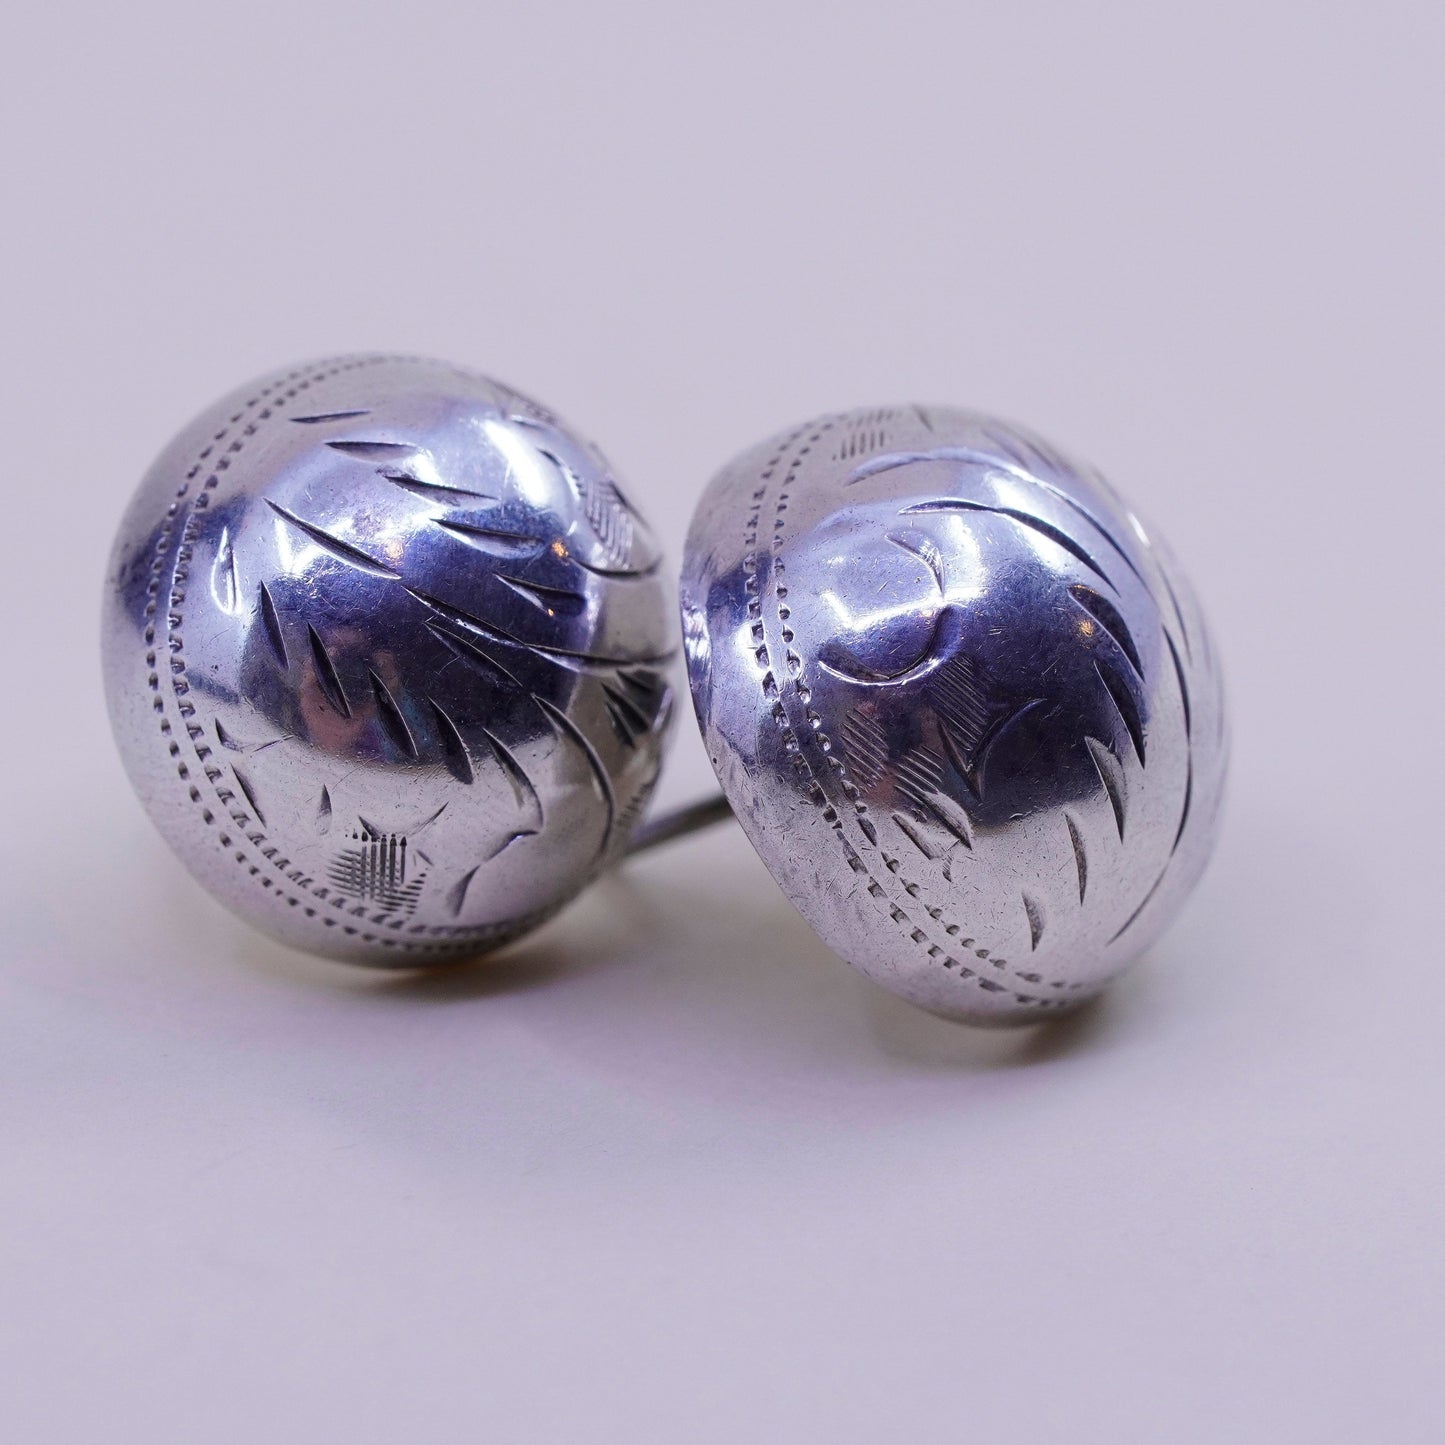 0.75”, Vintage sterling silver button studs, handmade puffy 925 earrings